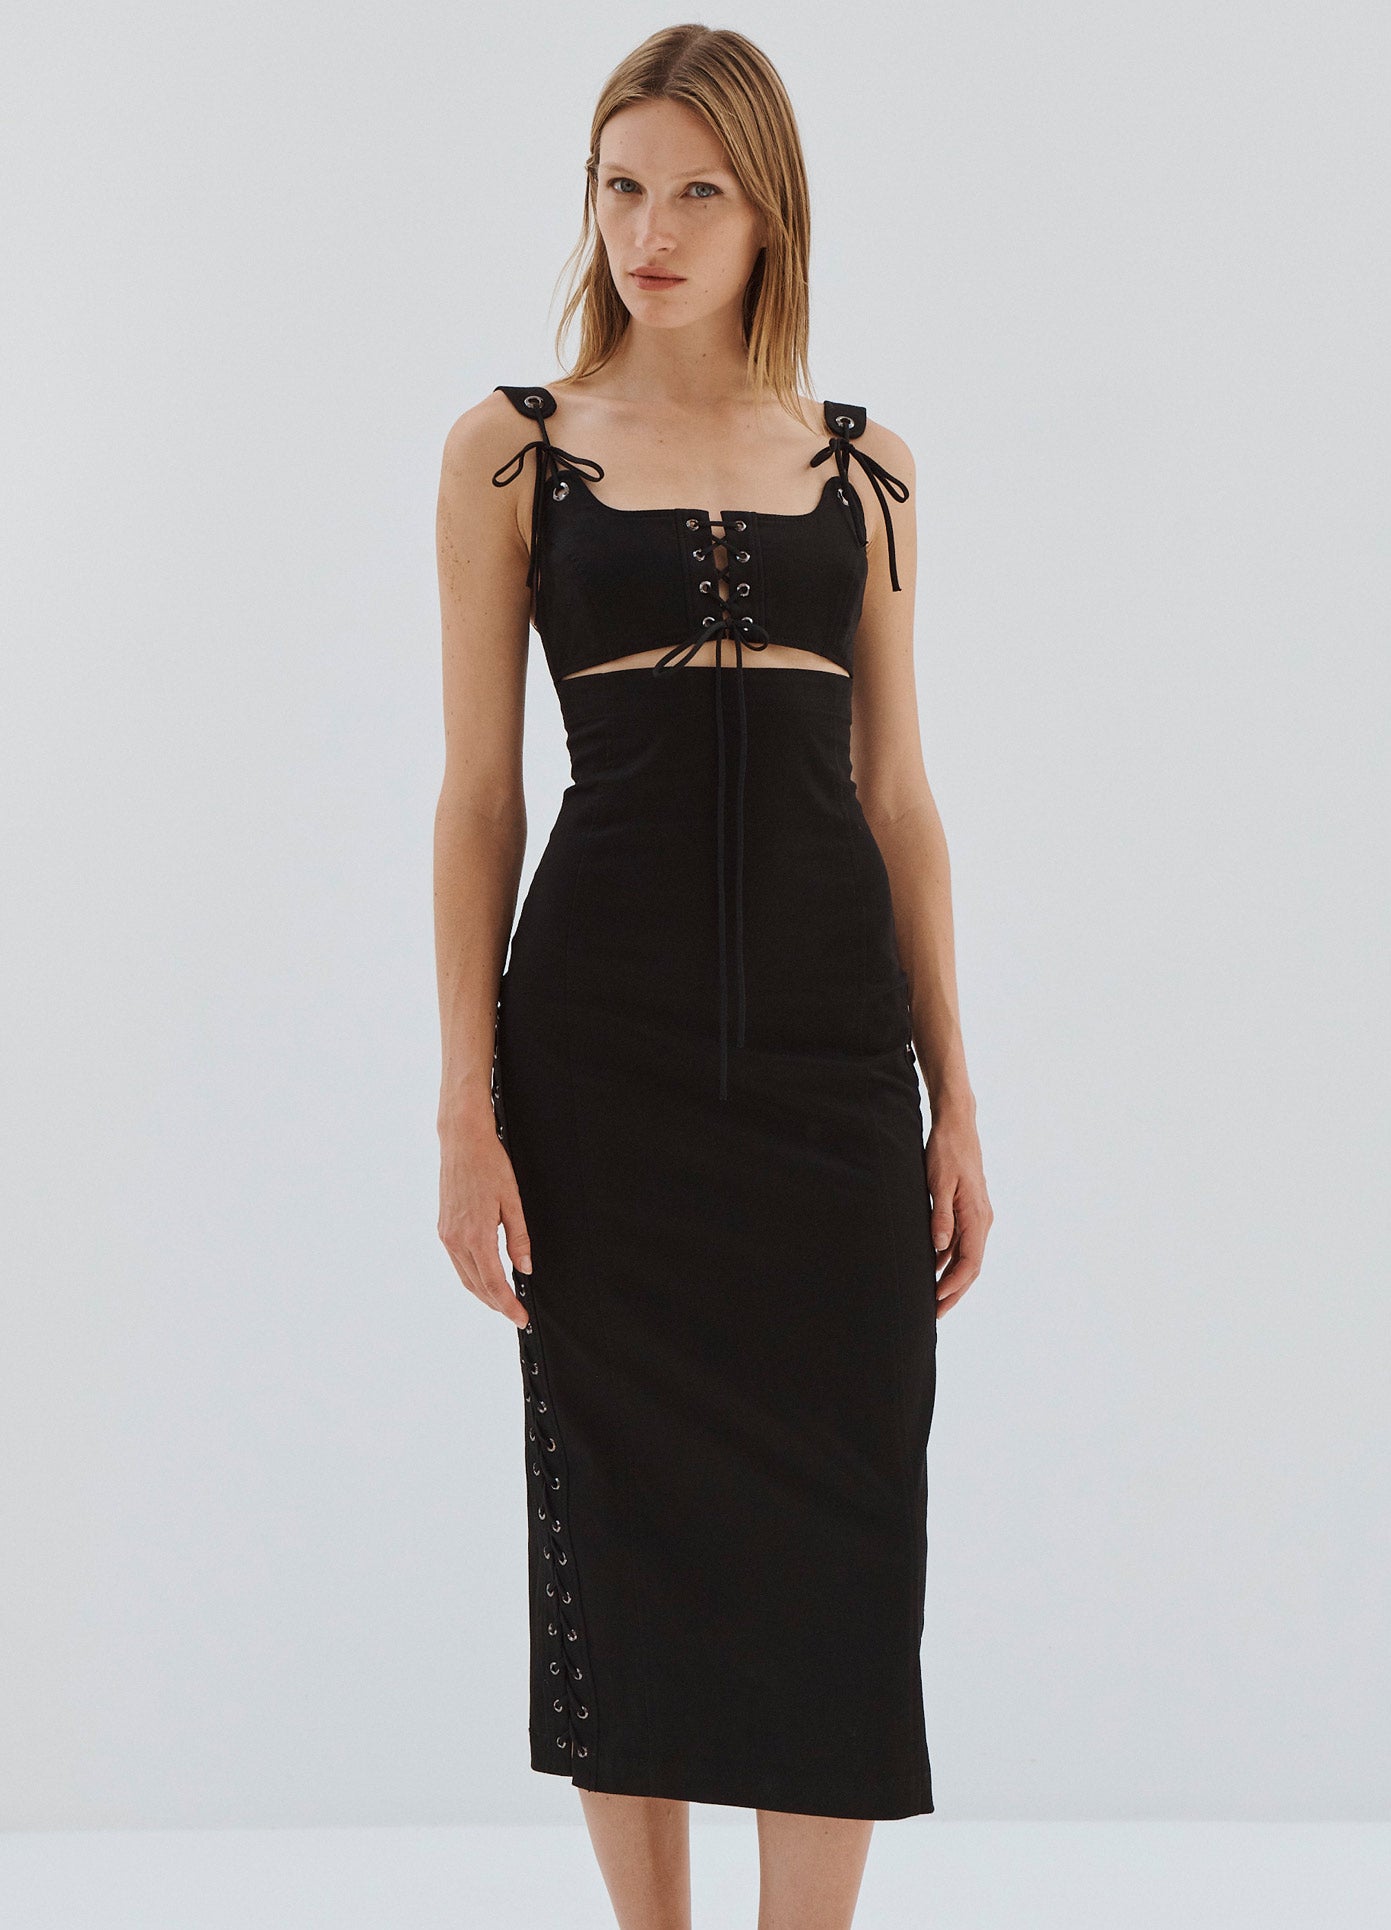 MONSE Laced Detail Dress in Black on Model Front View